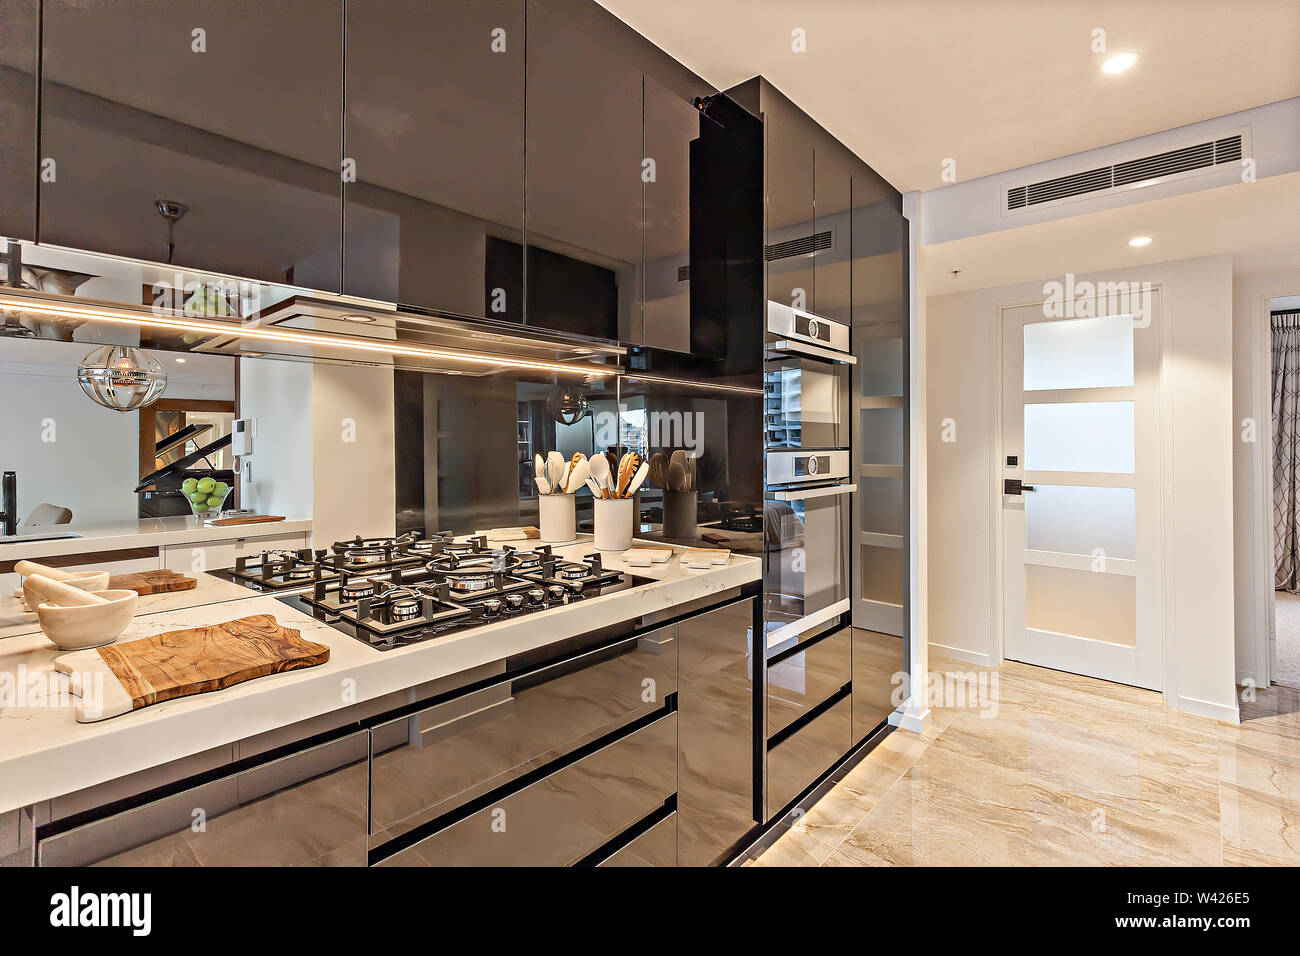 A Modern Kitchen Area With Designer Cabinets Electronic Equipment